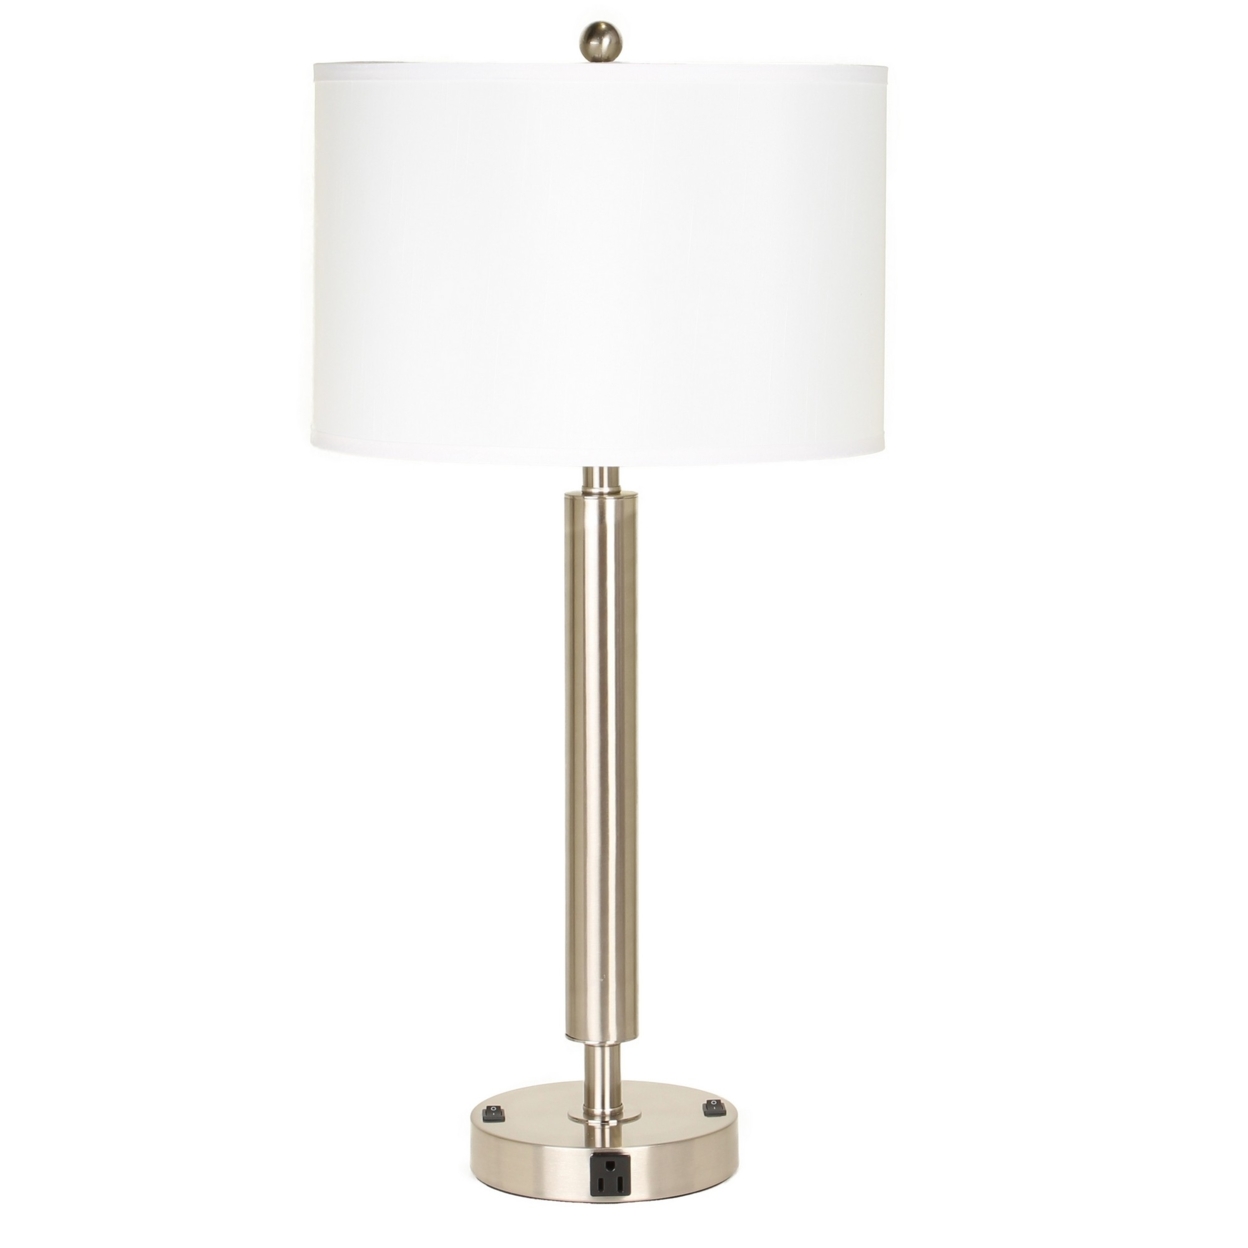 Metal Table Lamp With Fabric Drum Shade, Silver And White- Saltoro Sherpi